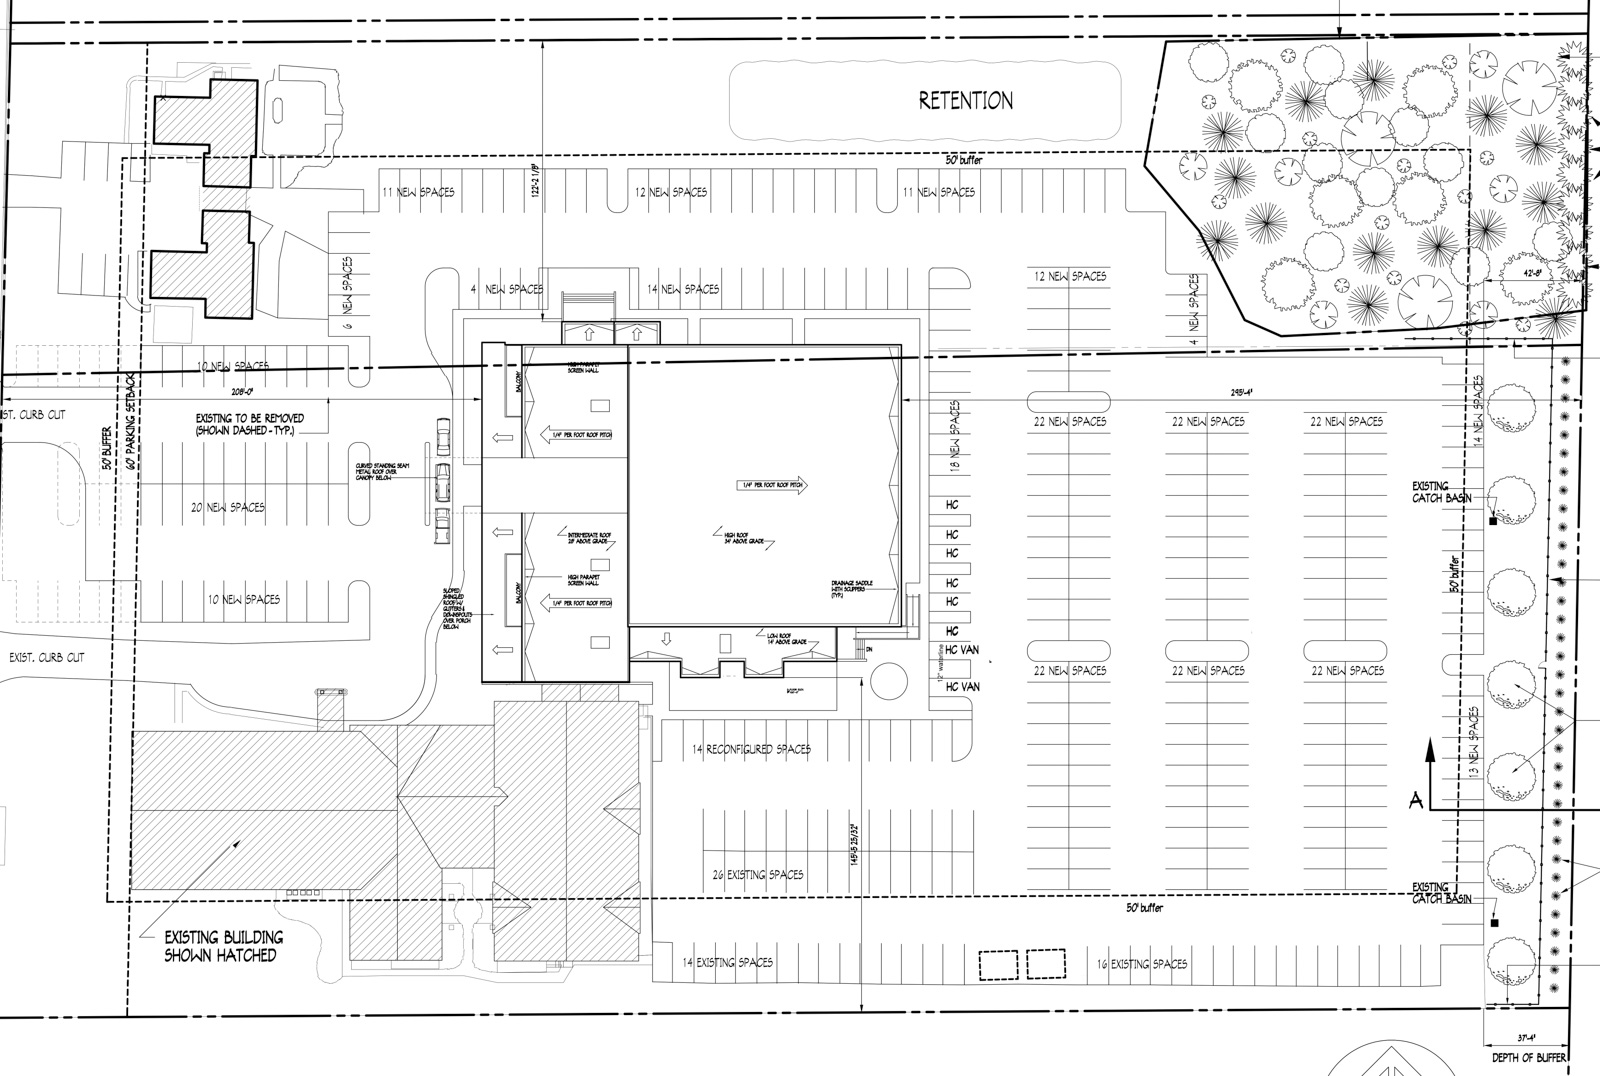 site plan approved with planning commission’s conditions